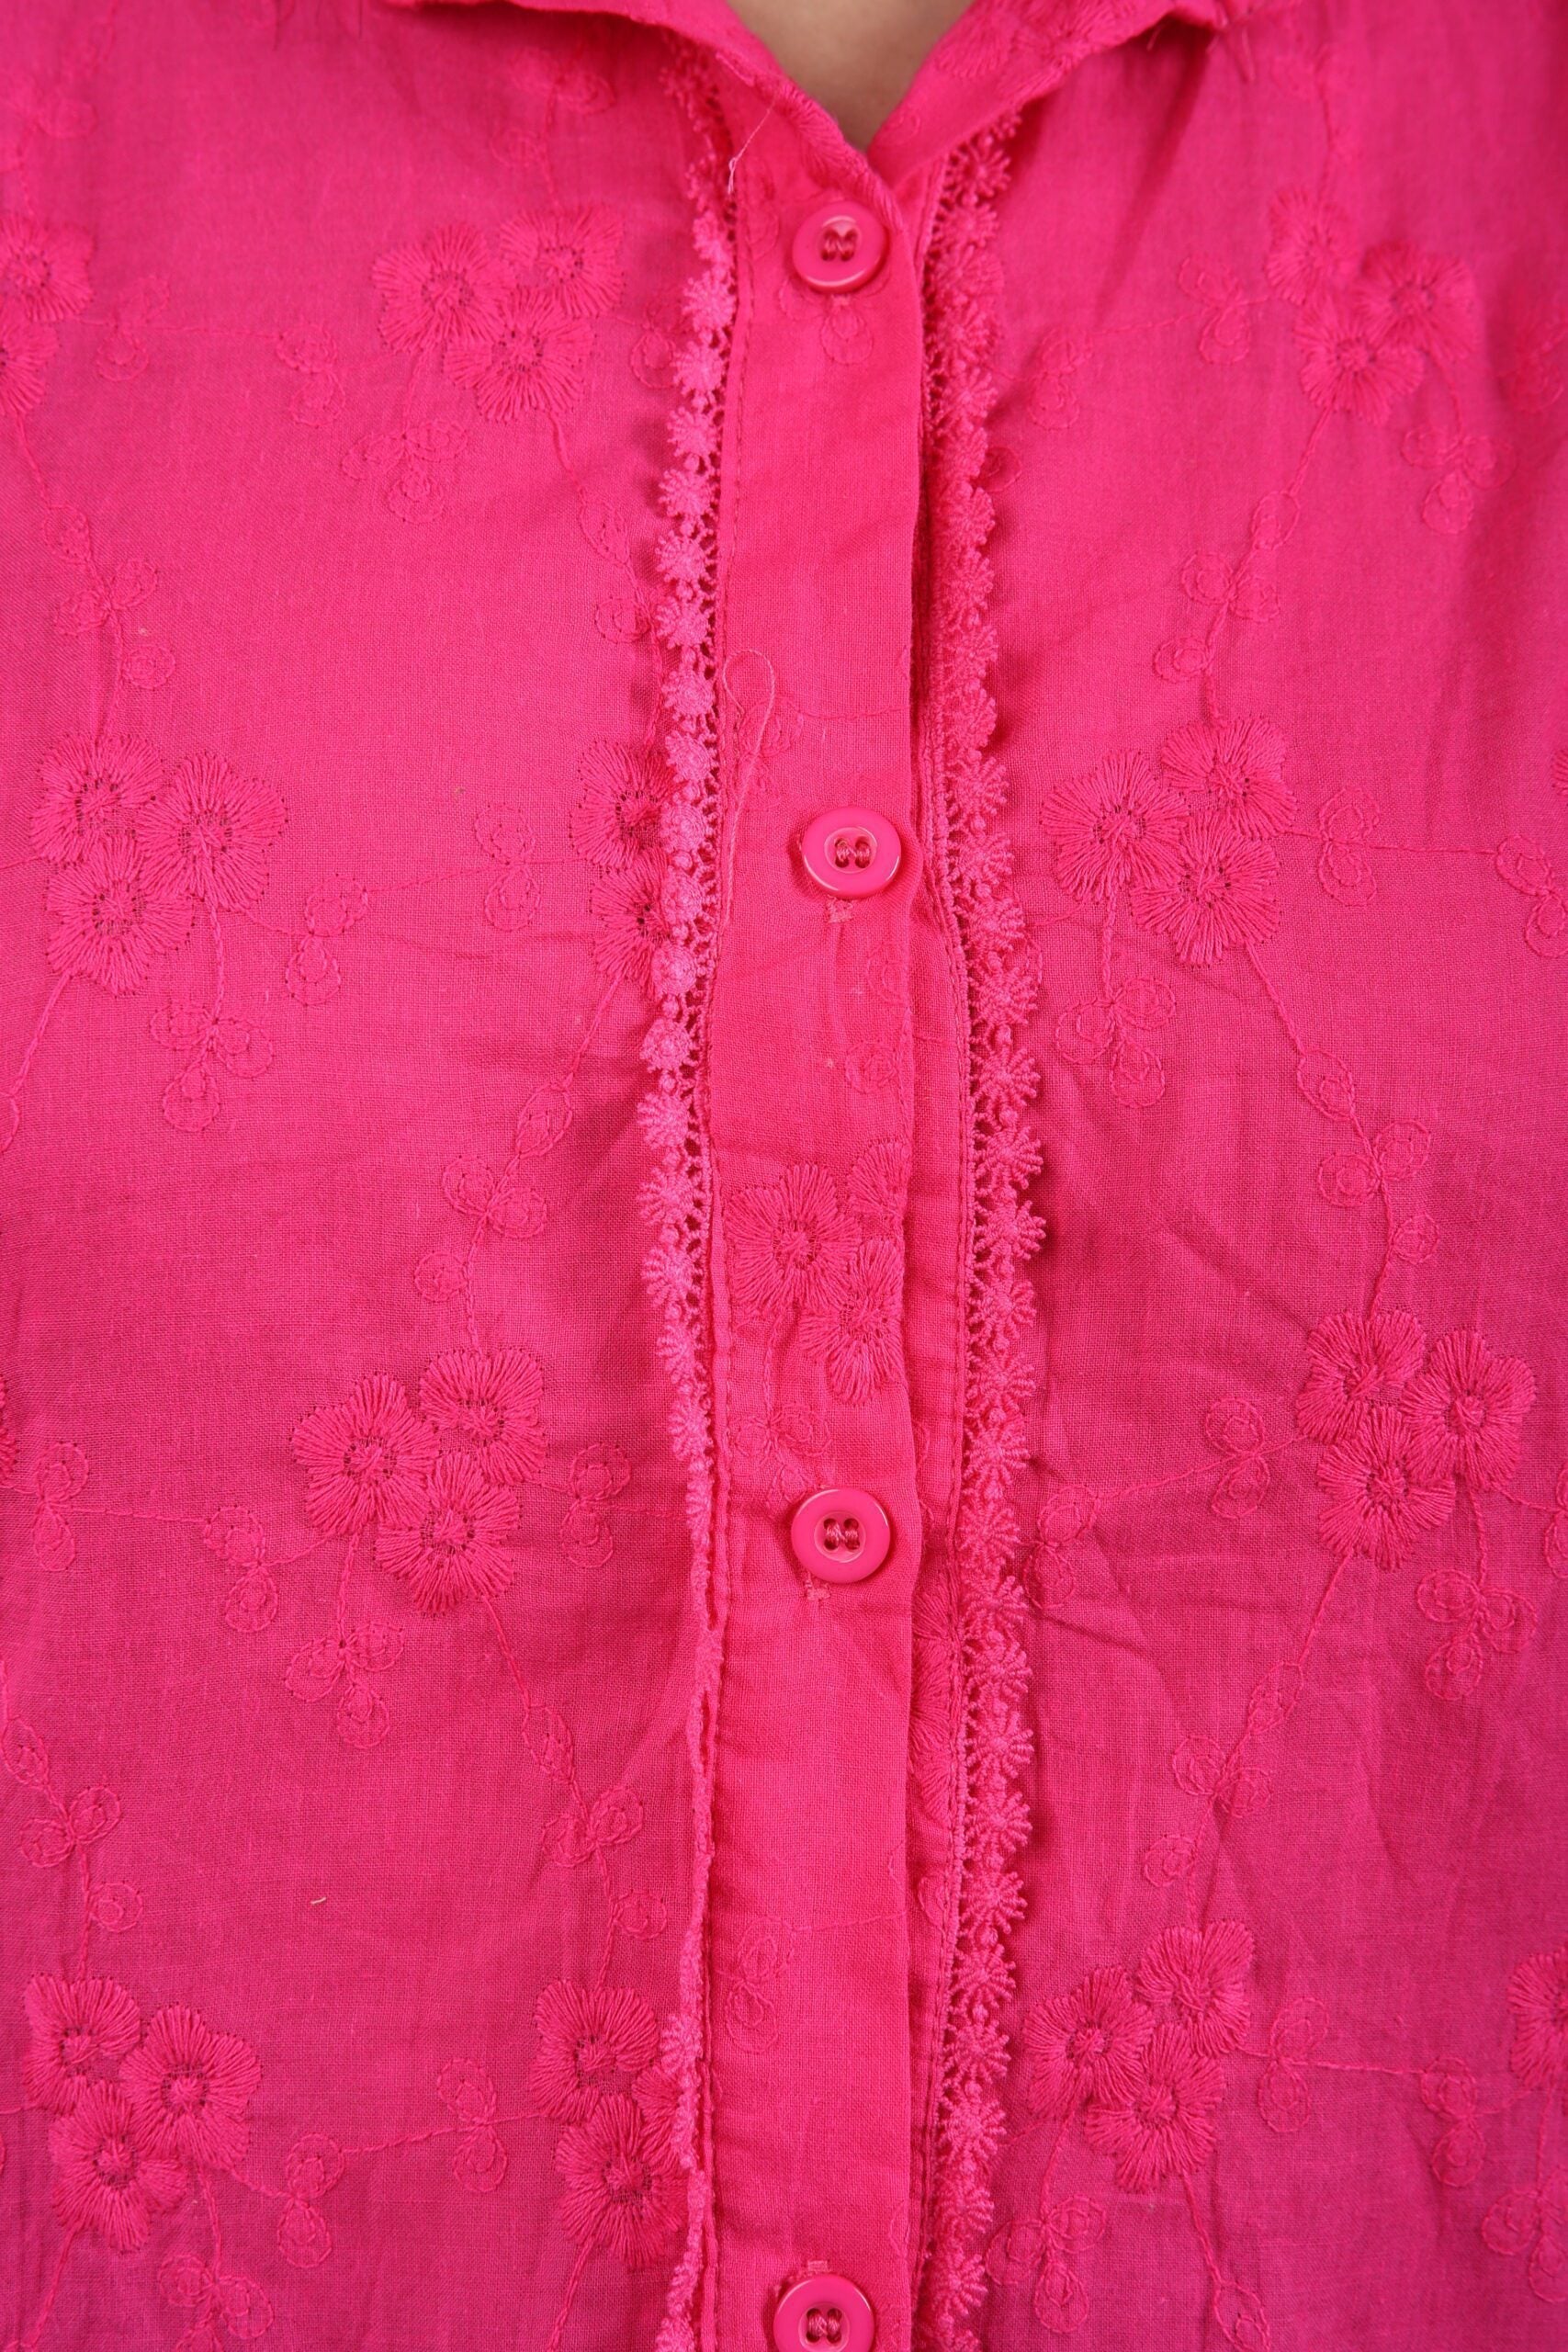 Pocketed Chicken Shirt  Top (Hot Pink) A Perfect Blend of Comfort and Style!